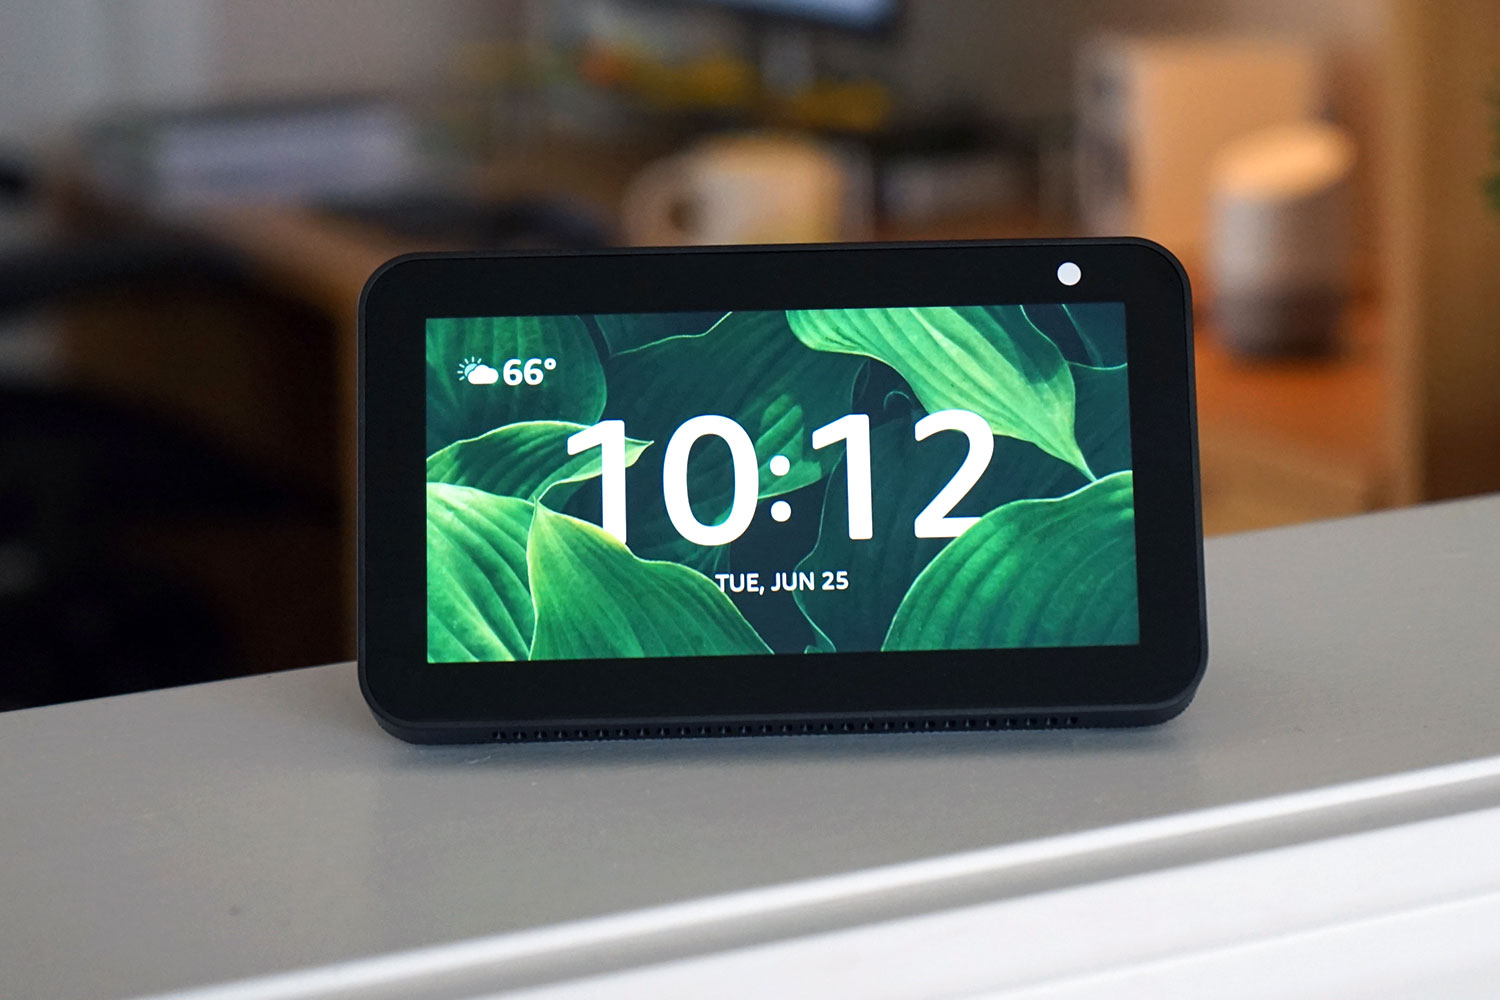 Amazon Echo Show 5 Review: A Smart Display Hidden in a Clock